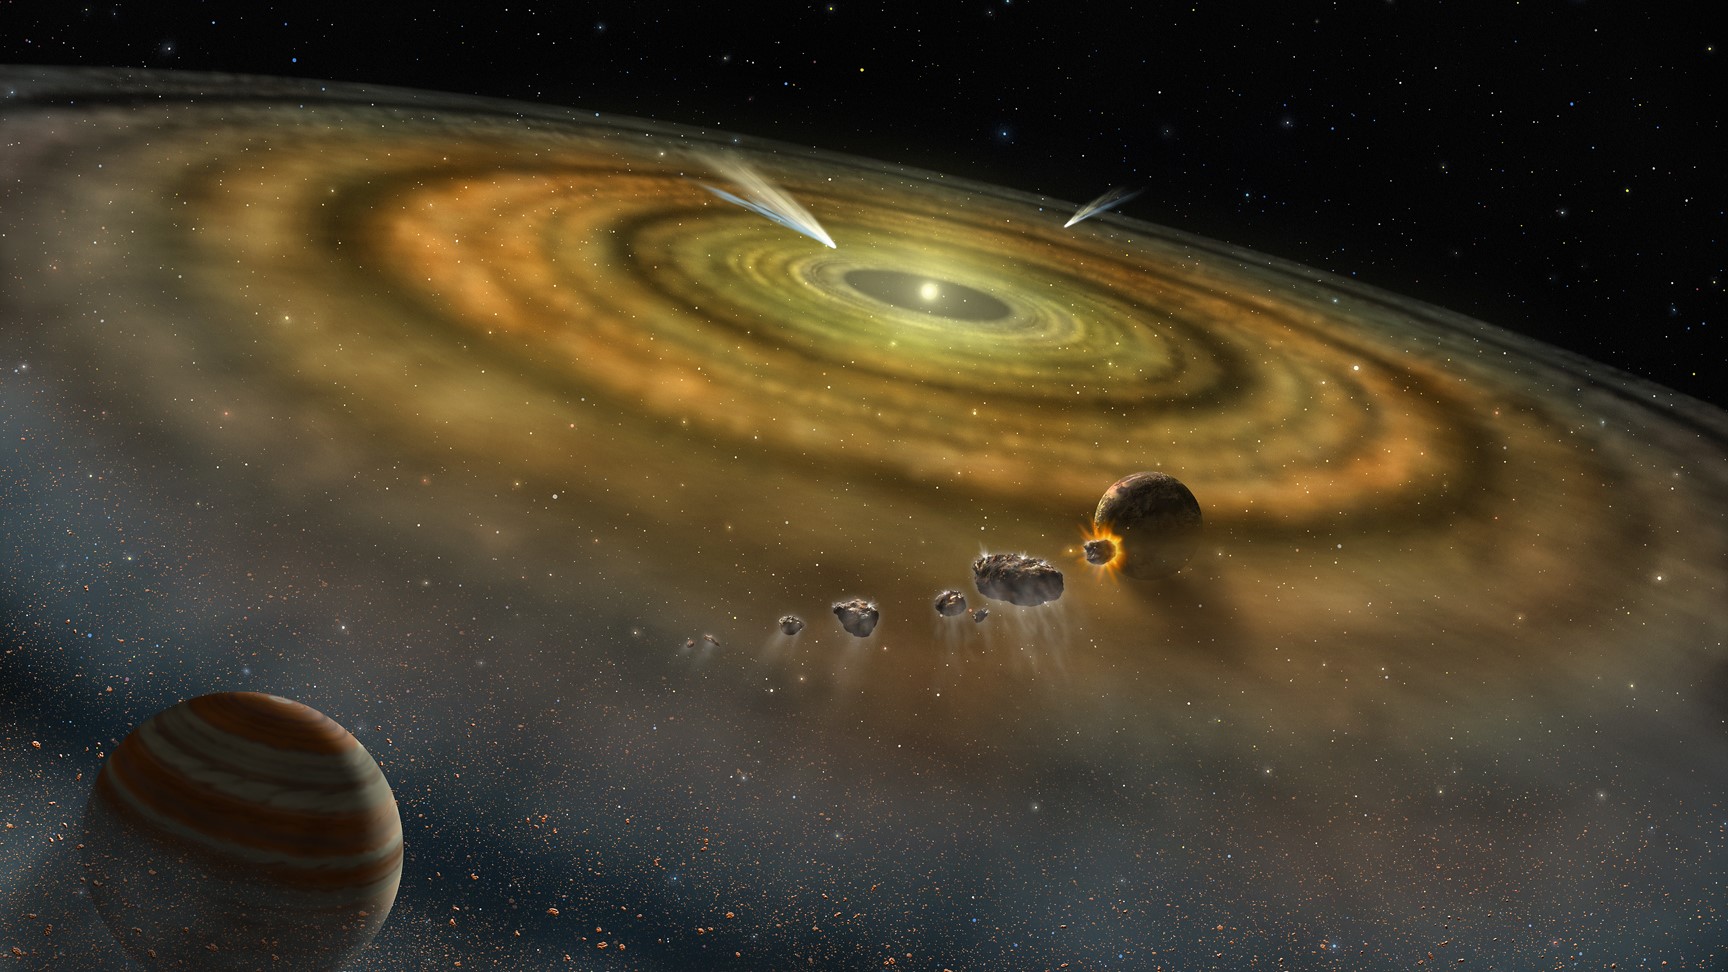 Artist's depiction of planets forming from a disk of material surrounding a star.